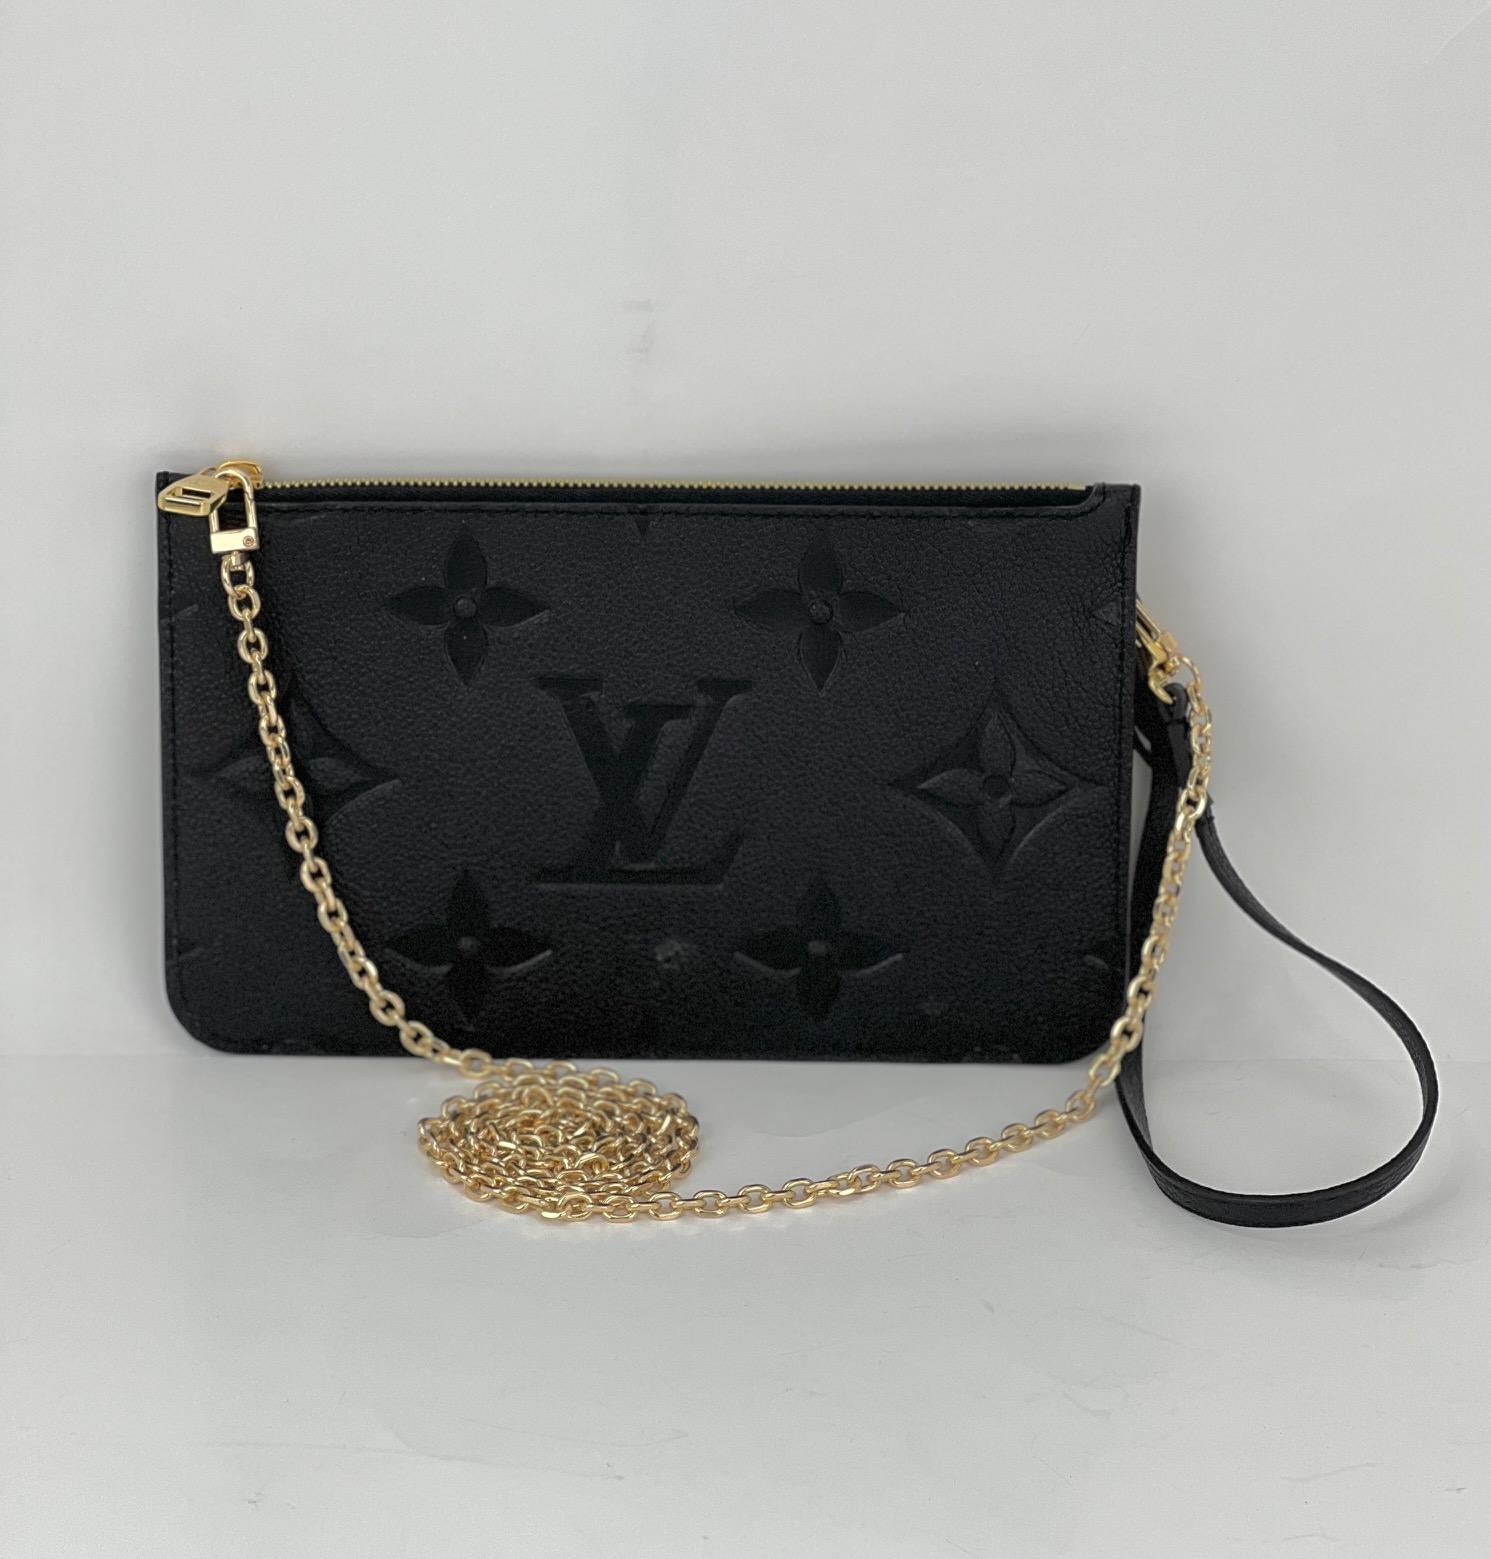 Preowned 100% Authentic
Louis Vuitton Pochette Black Empreinte Leather
from a Neverfull W/added chain to use as a
Shoulder or Crossbody Bag
RATING: A...excellent, near mint, only 
slight signs of wear
MATERIAL: embossed monogram Empreinte